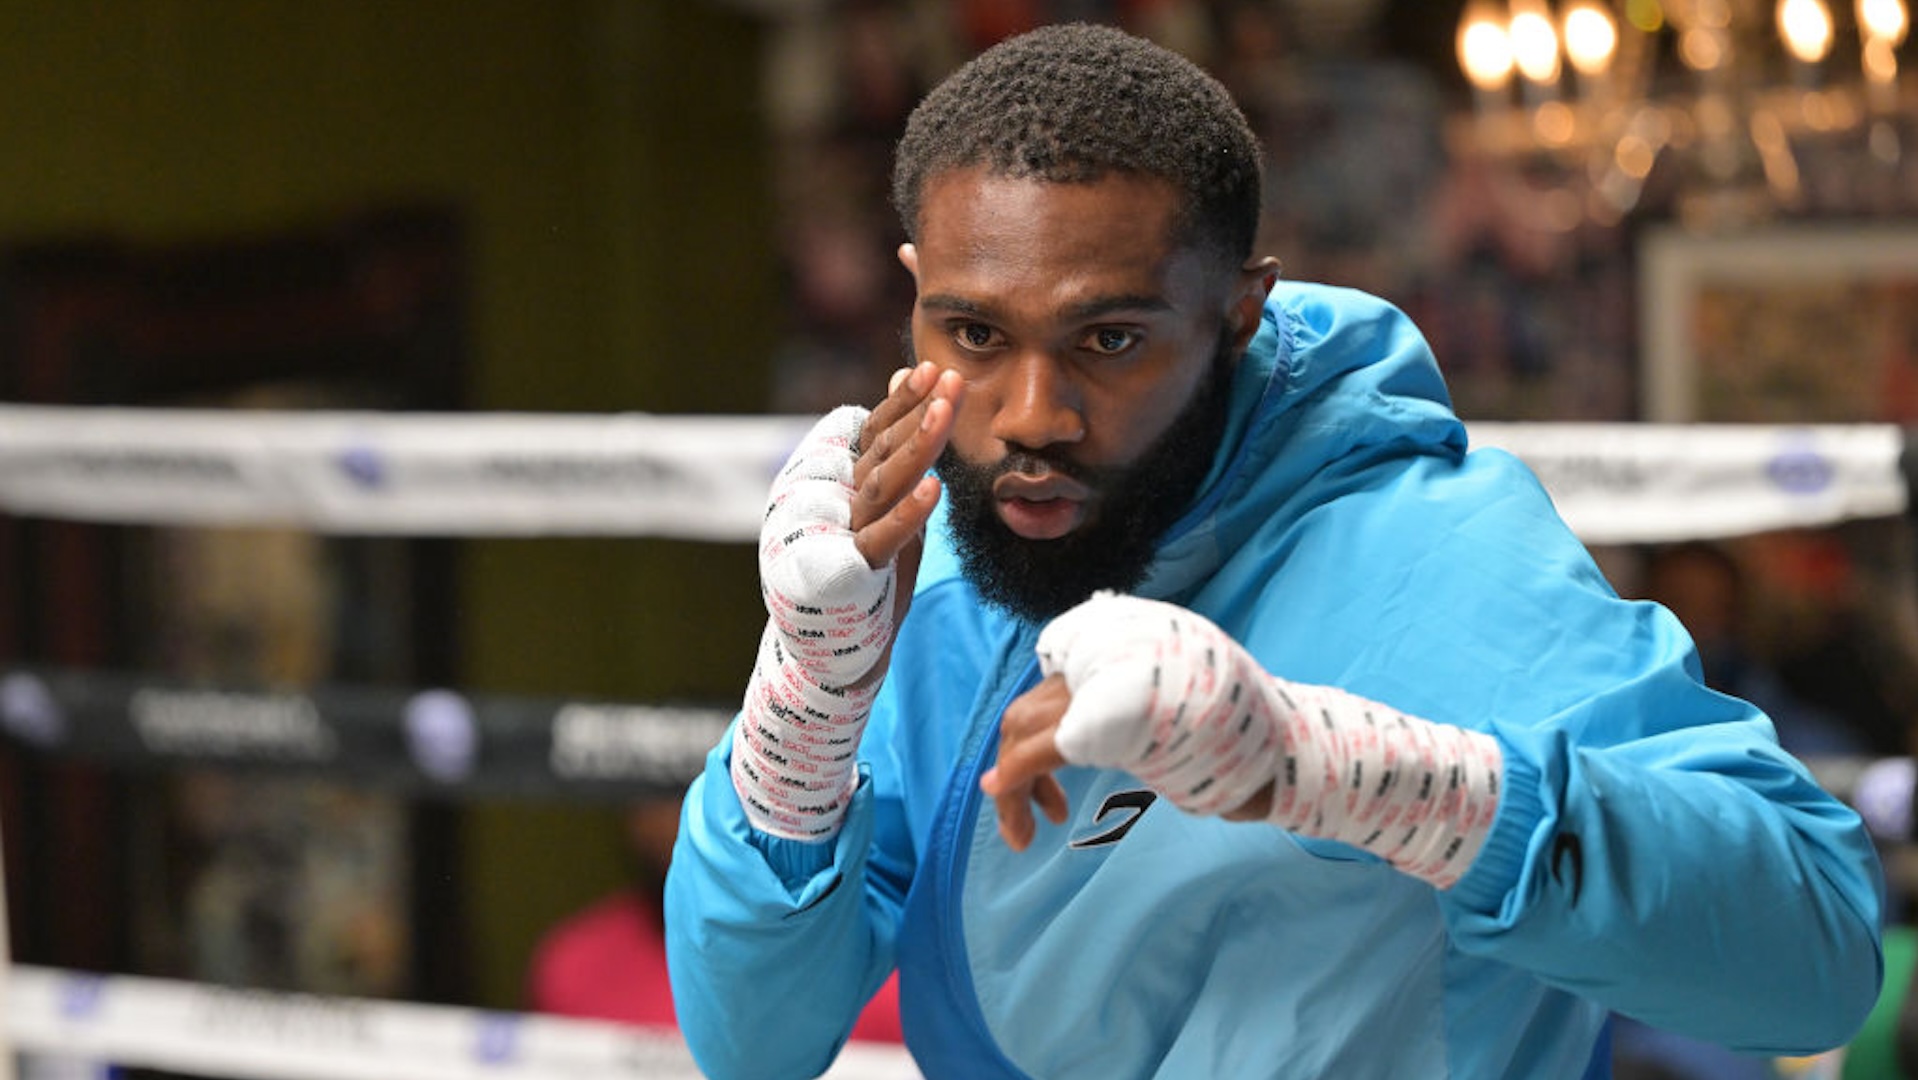 Welterweight contender Jaron Ennis trains during a media workout for his upcoming fight against Custio Clayton at Churchill Boxing Club on May 11, 2022 in Santa Monica, California.